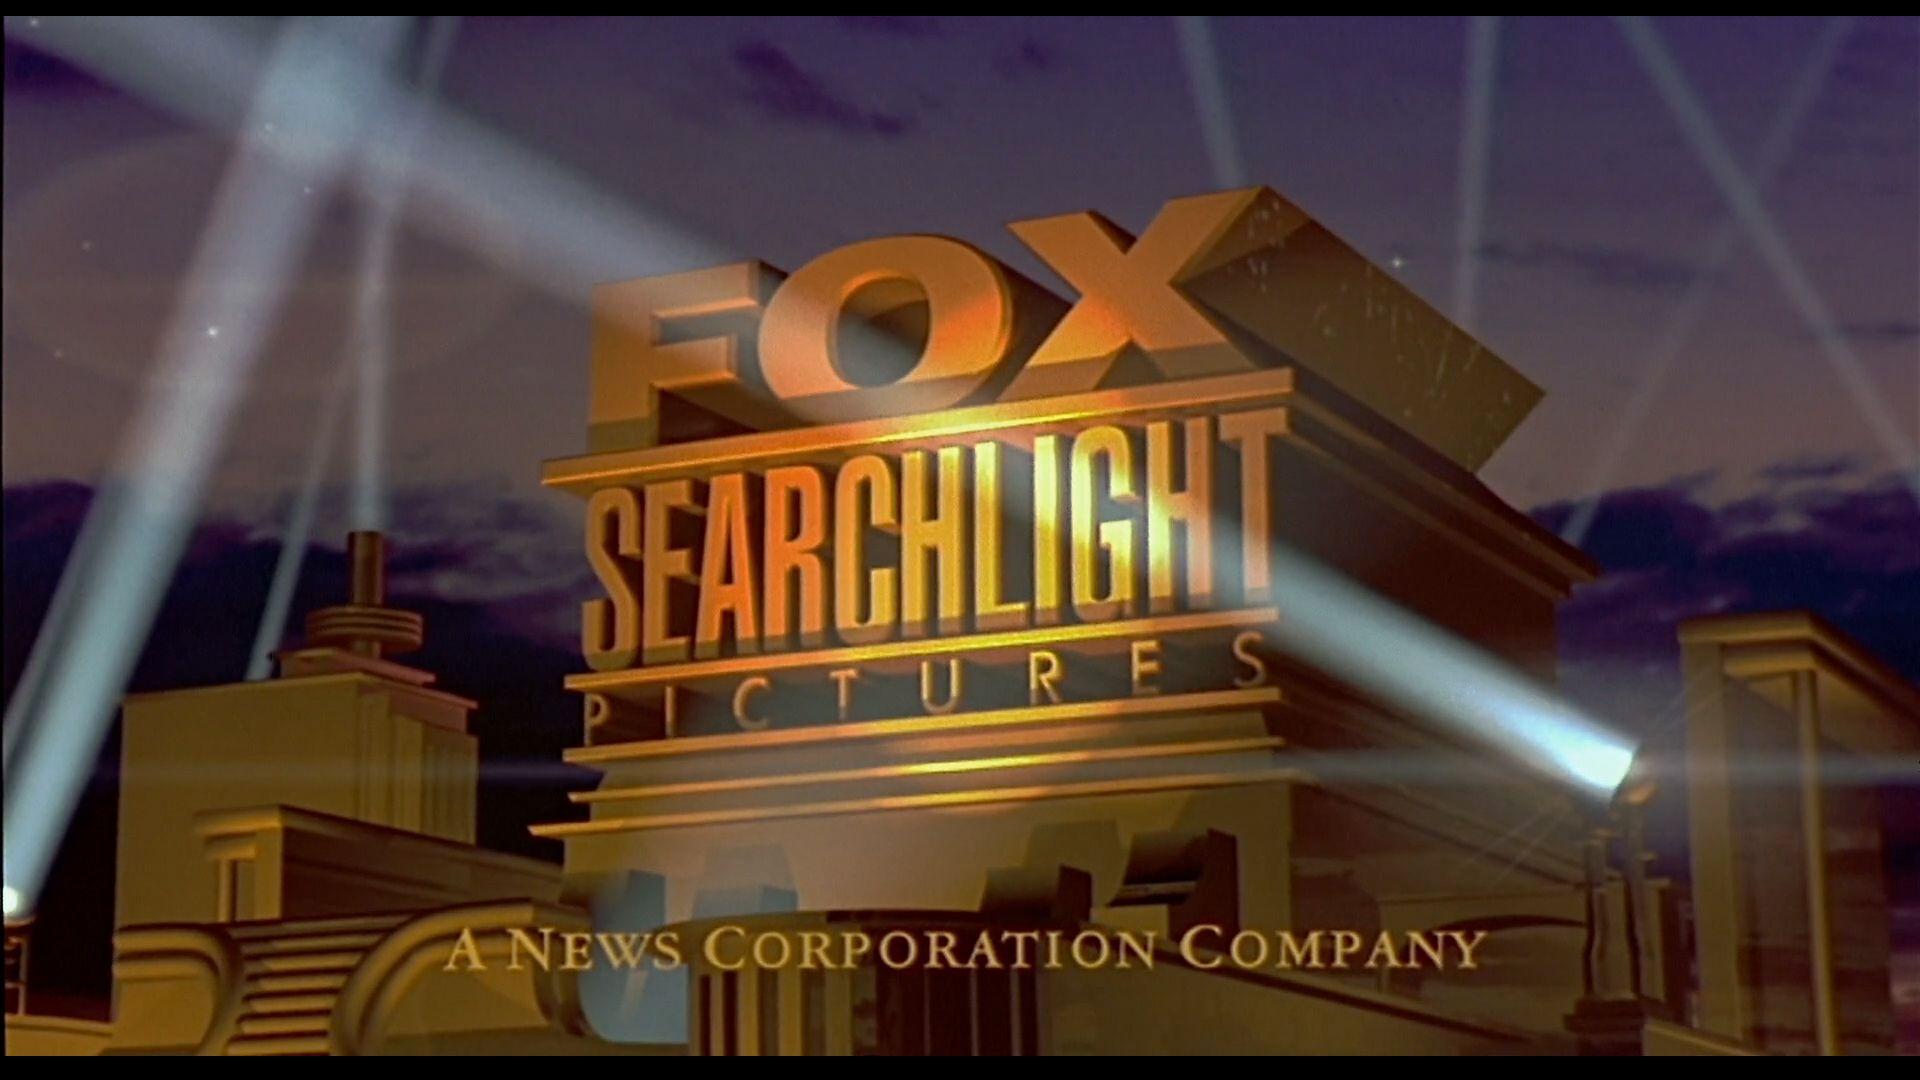 Fox Searchlight Pictures Logo - Fox Searchlight Pictures from '28 Days Later' (2003) | AEWBoT ...